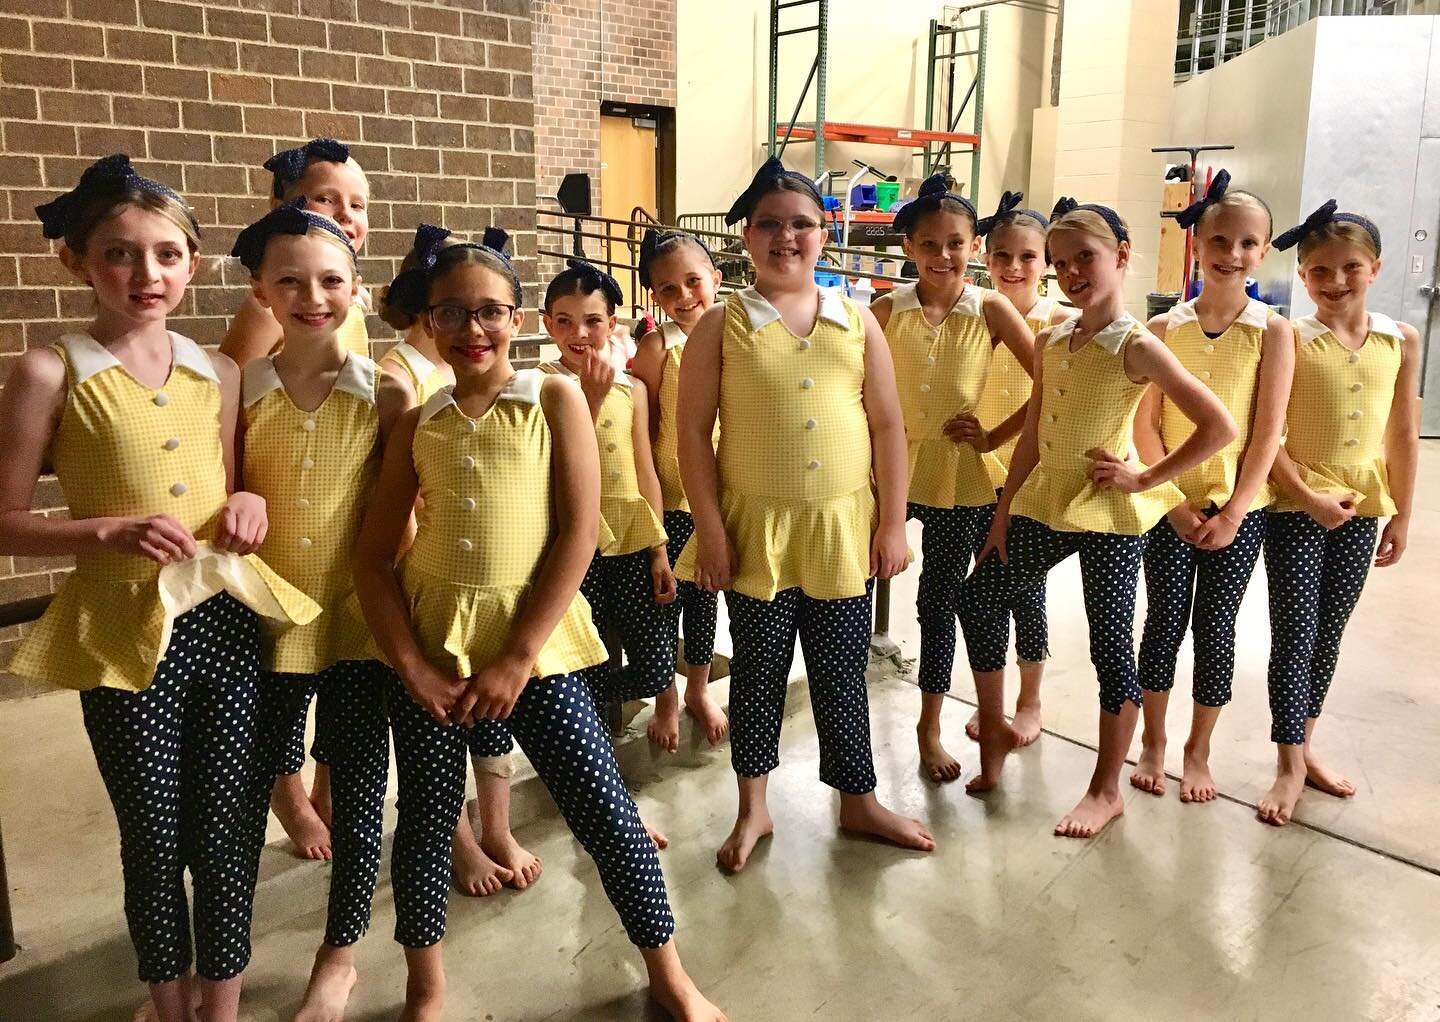 The backstage world is so much fun for dancers! ⭐️ #primarecital #dressrehearsal #primadancing